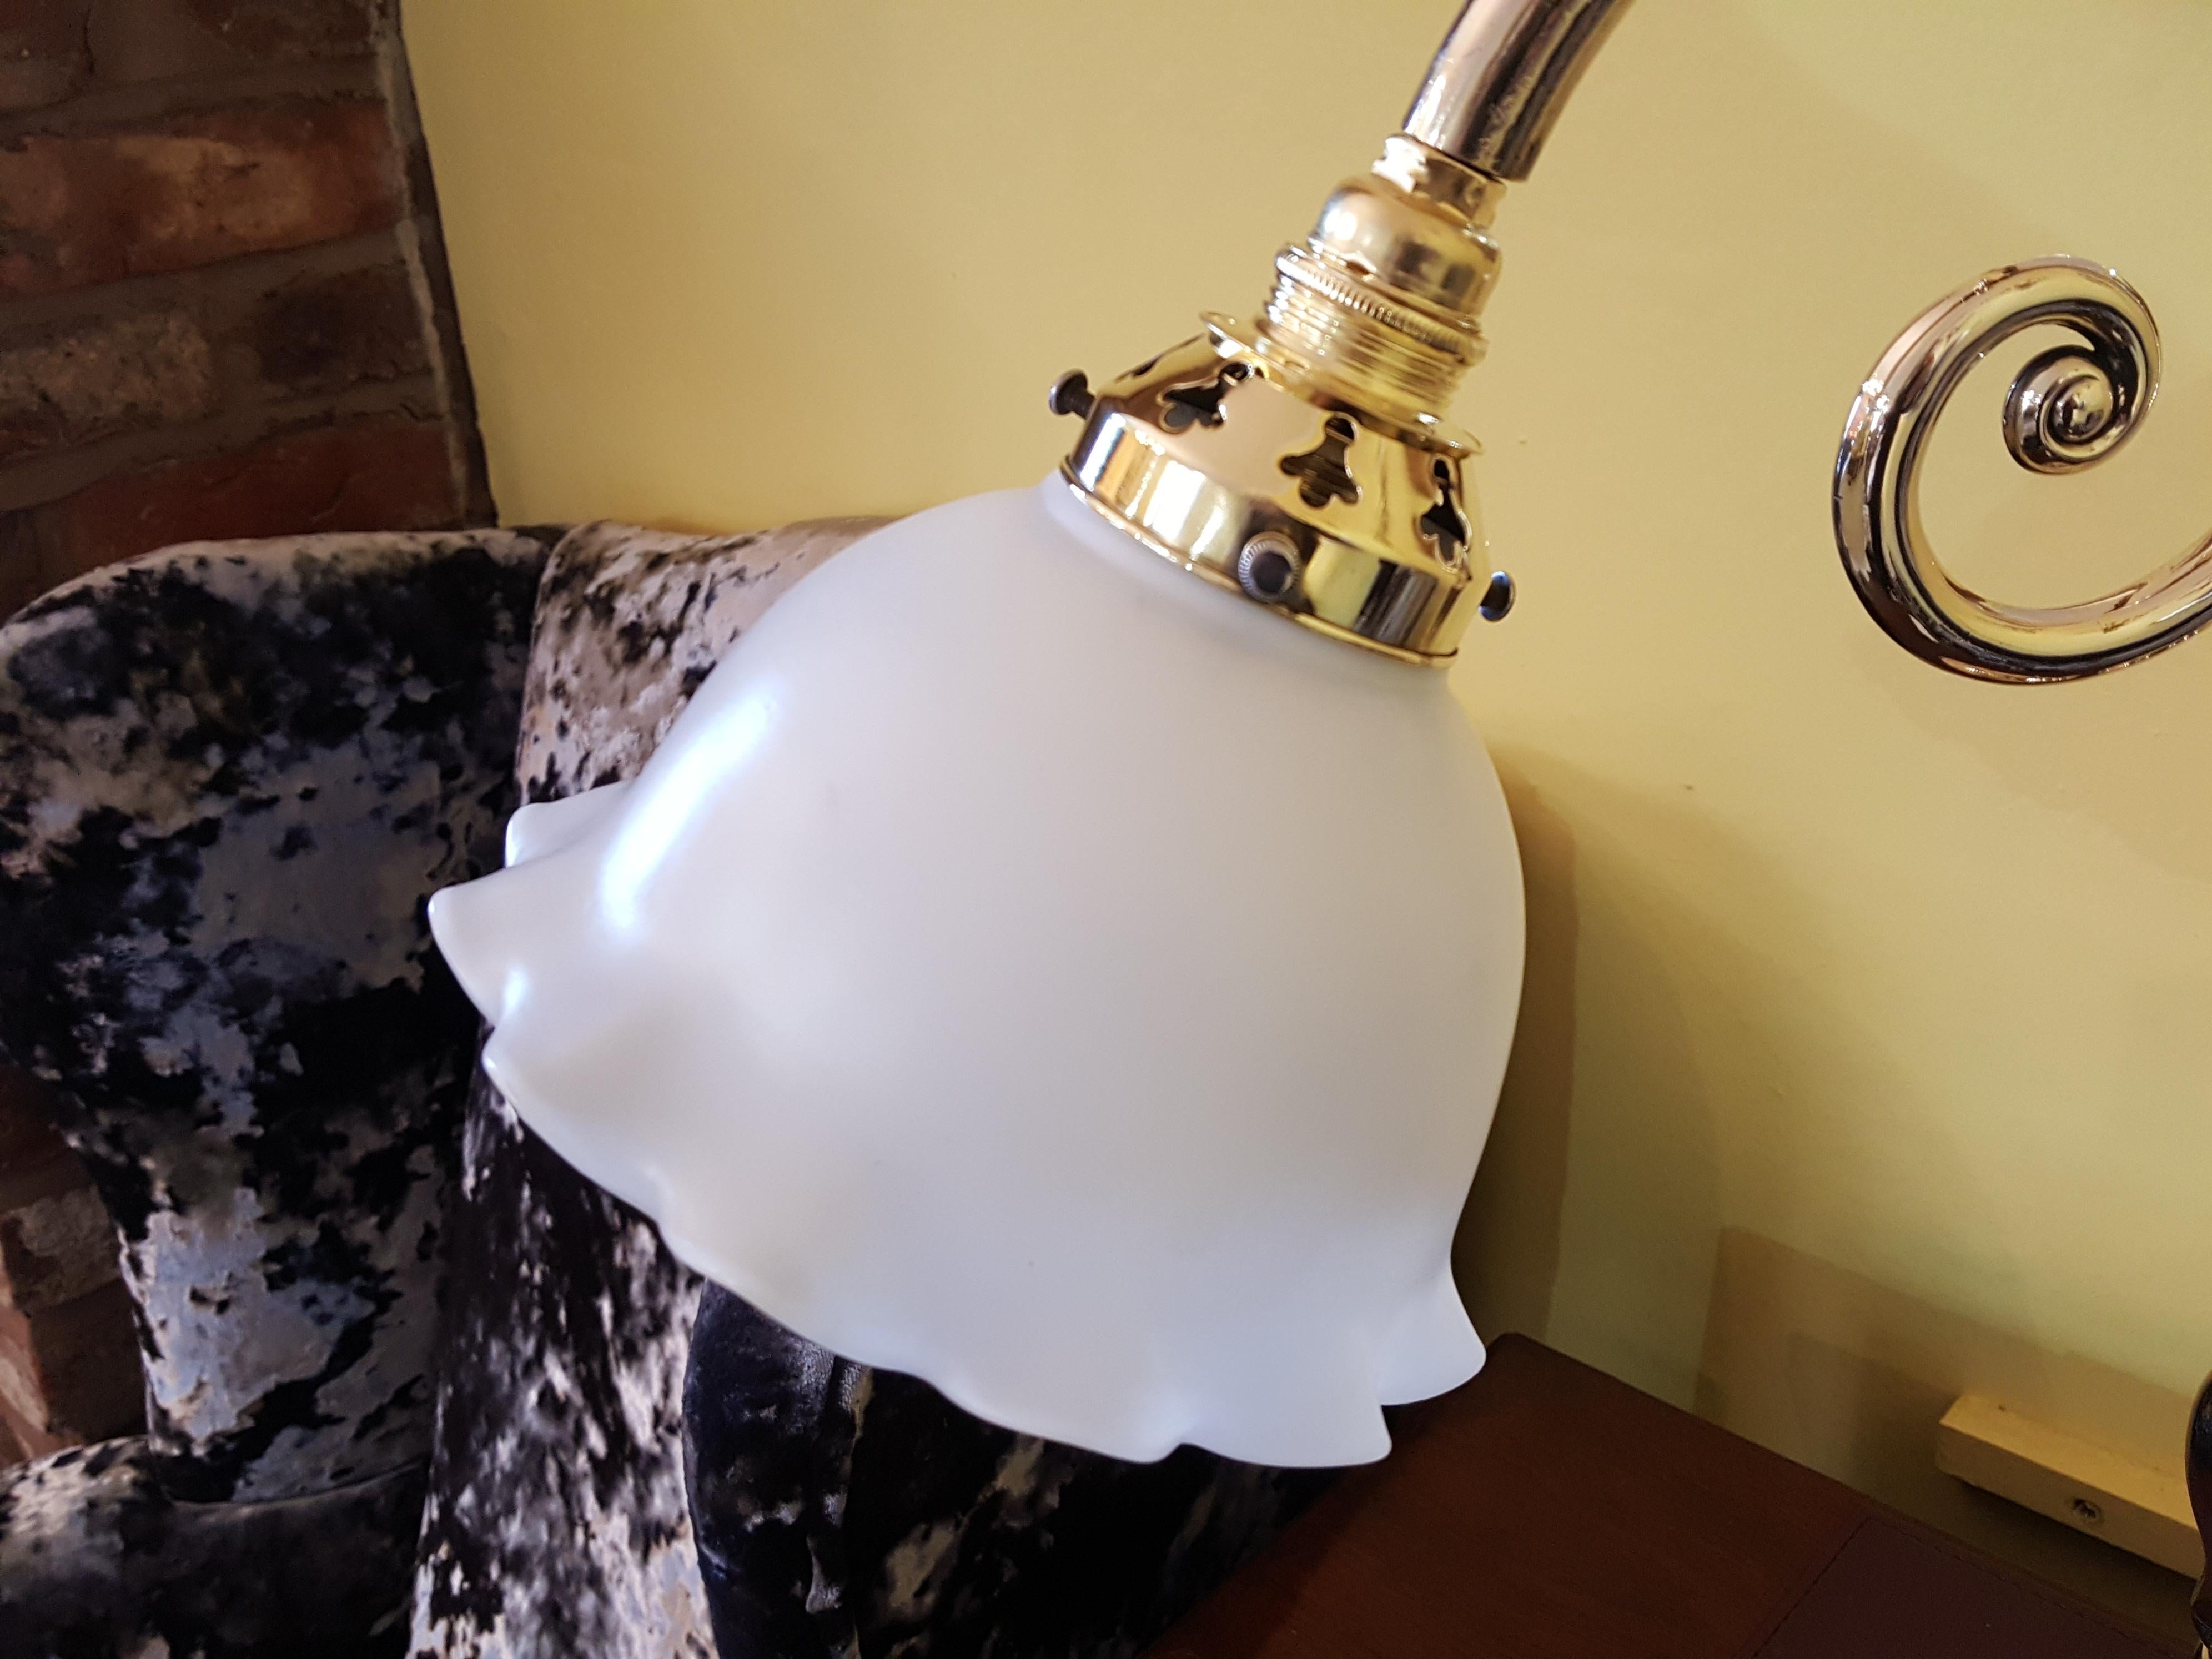 Edwardian brass desk lamp with frosted glass shade, scroll decoration to the arm, bulbous column on disc base - all lights and lamps have been rewired with authentic corded flex, fitted with either foot switch or finger clicker switch and are pat